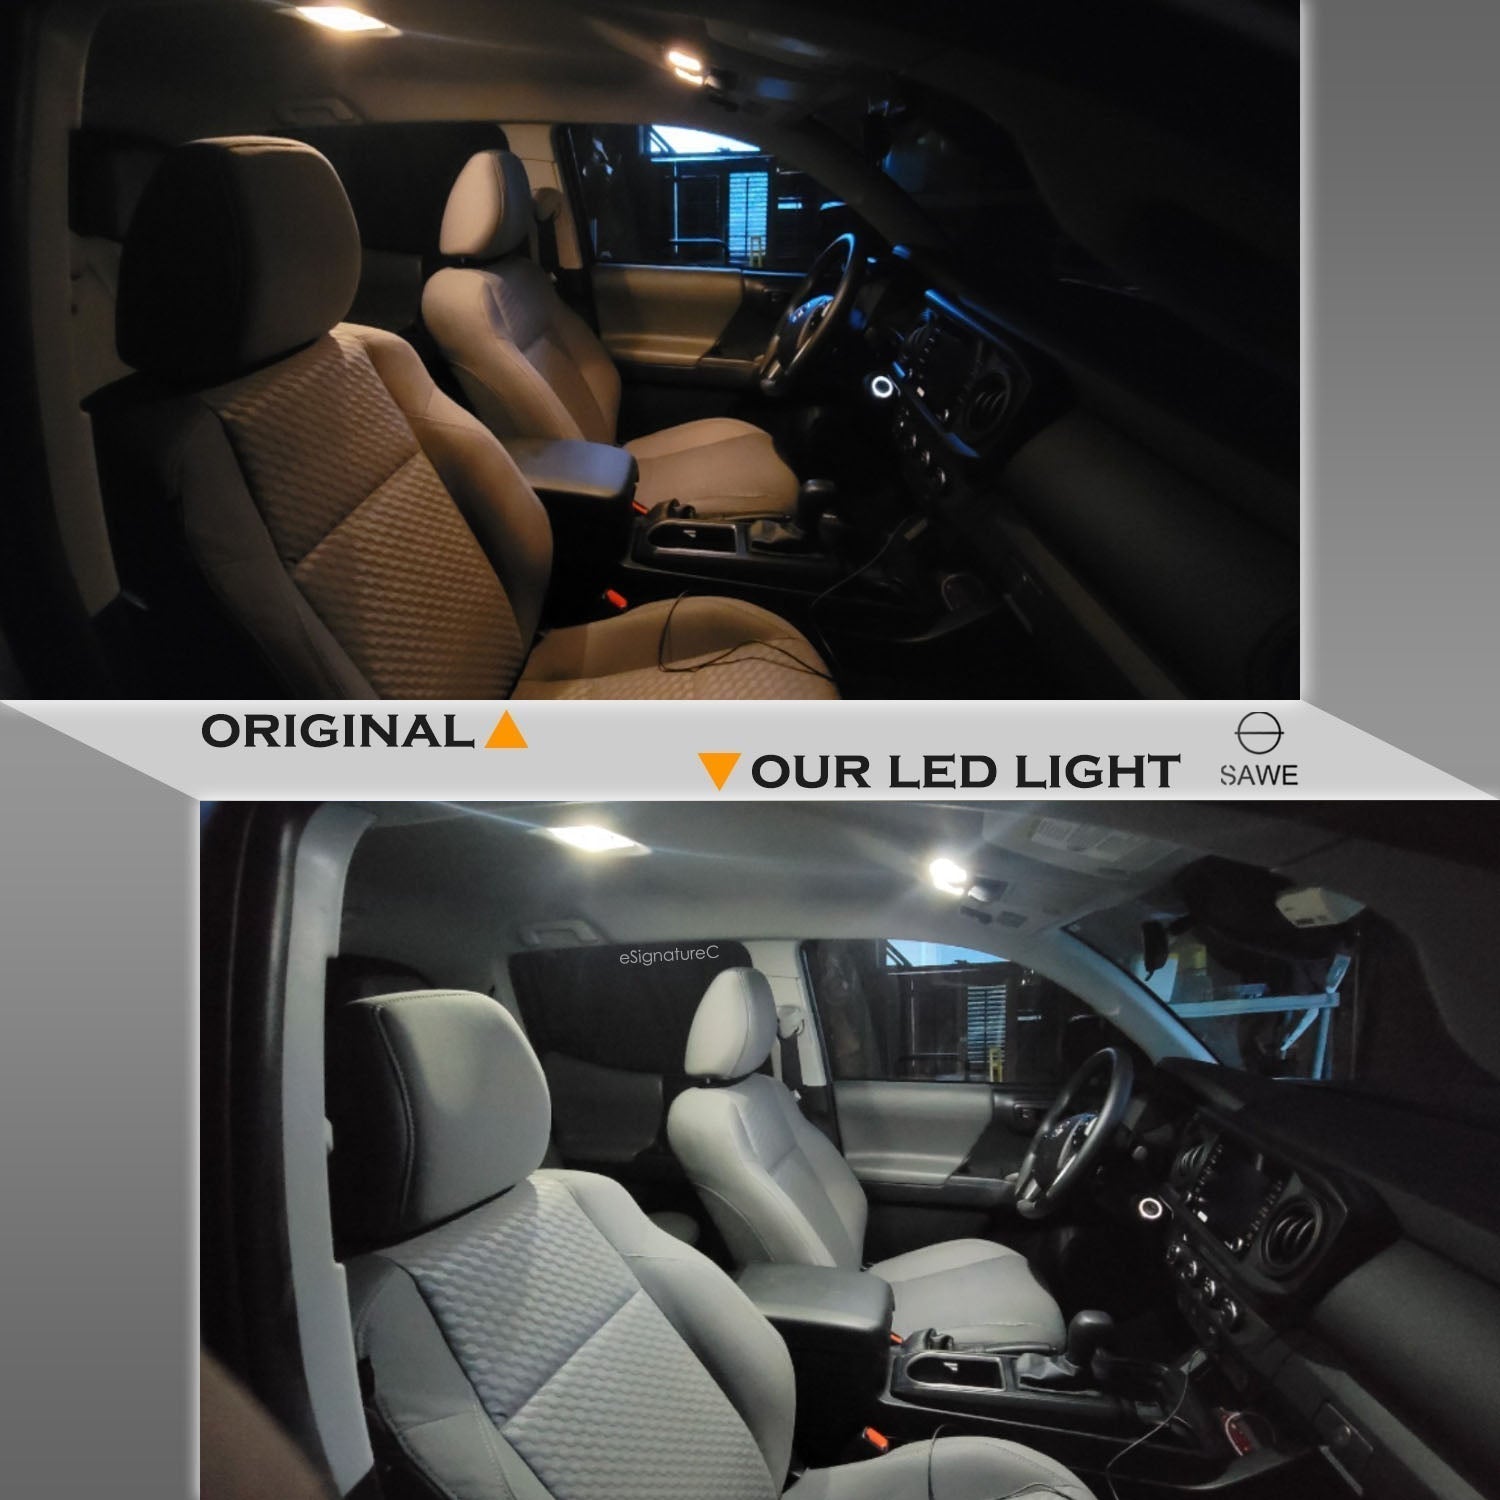 For Ford Focus Interior LED Lights - Dome & Map Light Bulbs Package Kit for 2000 - 2011 - White